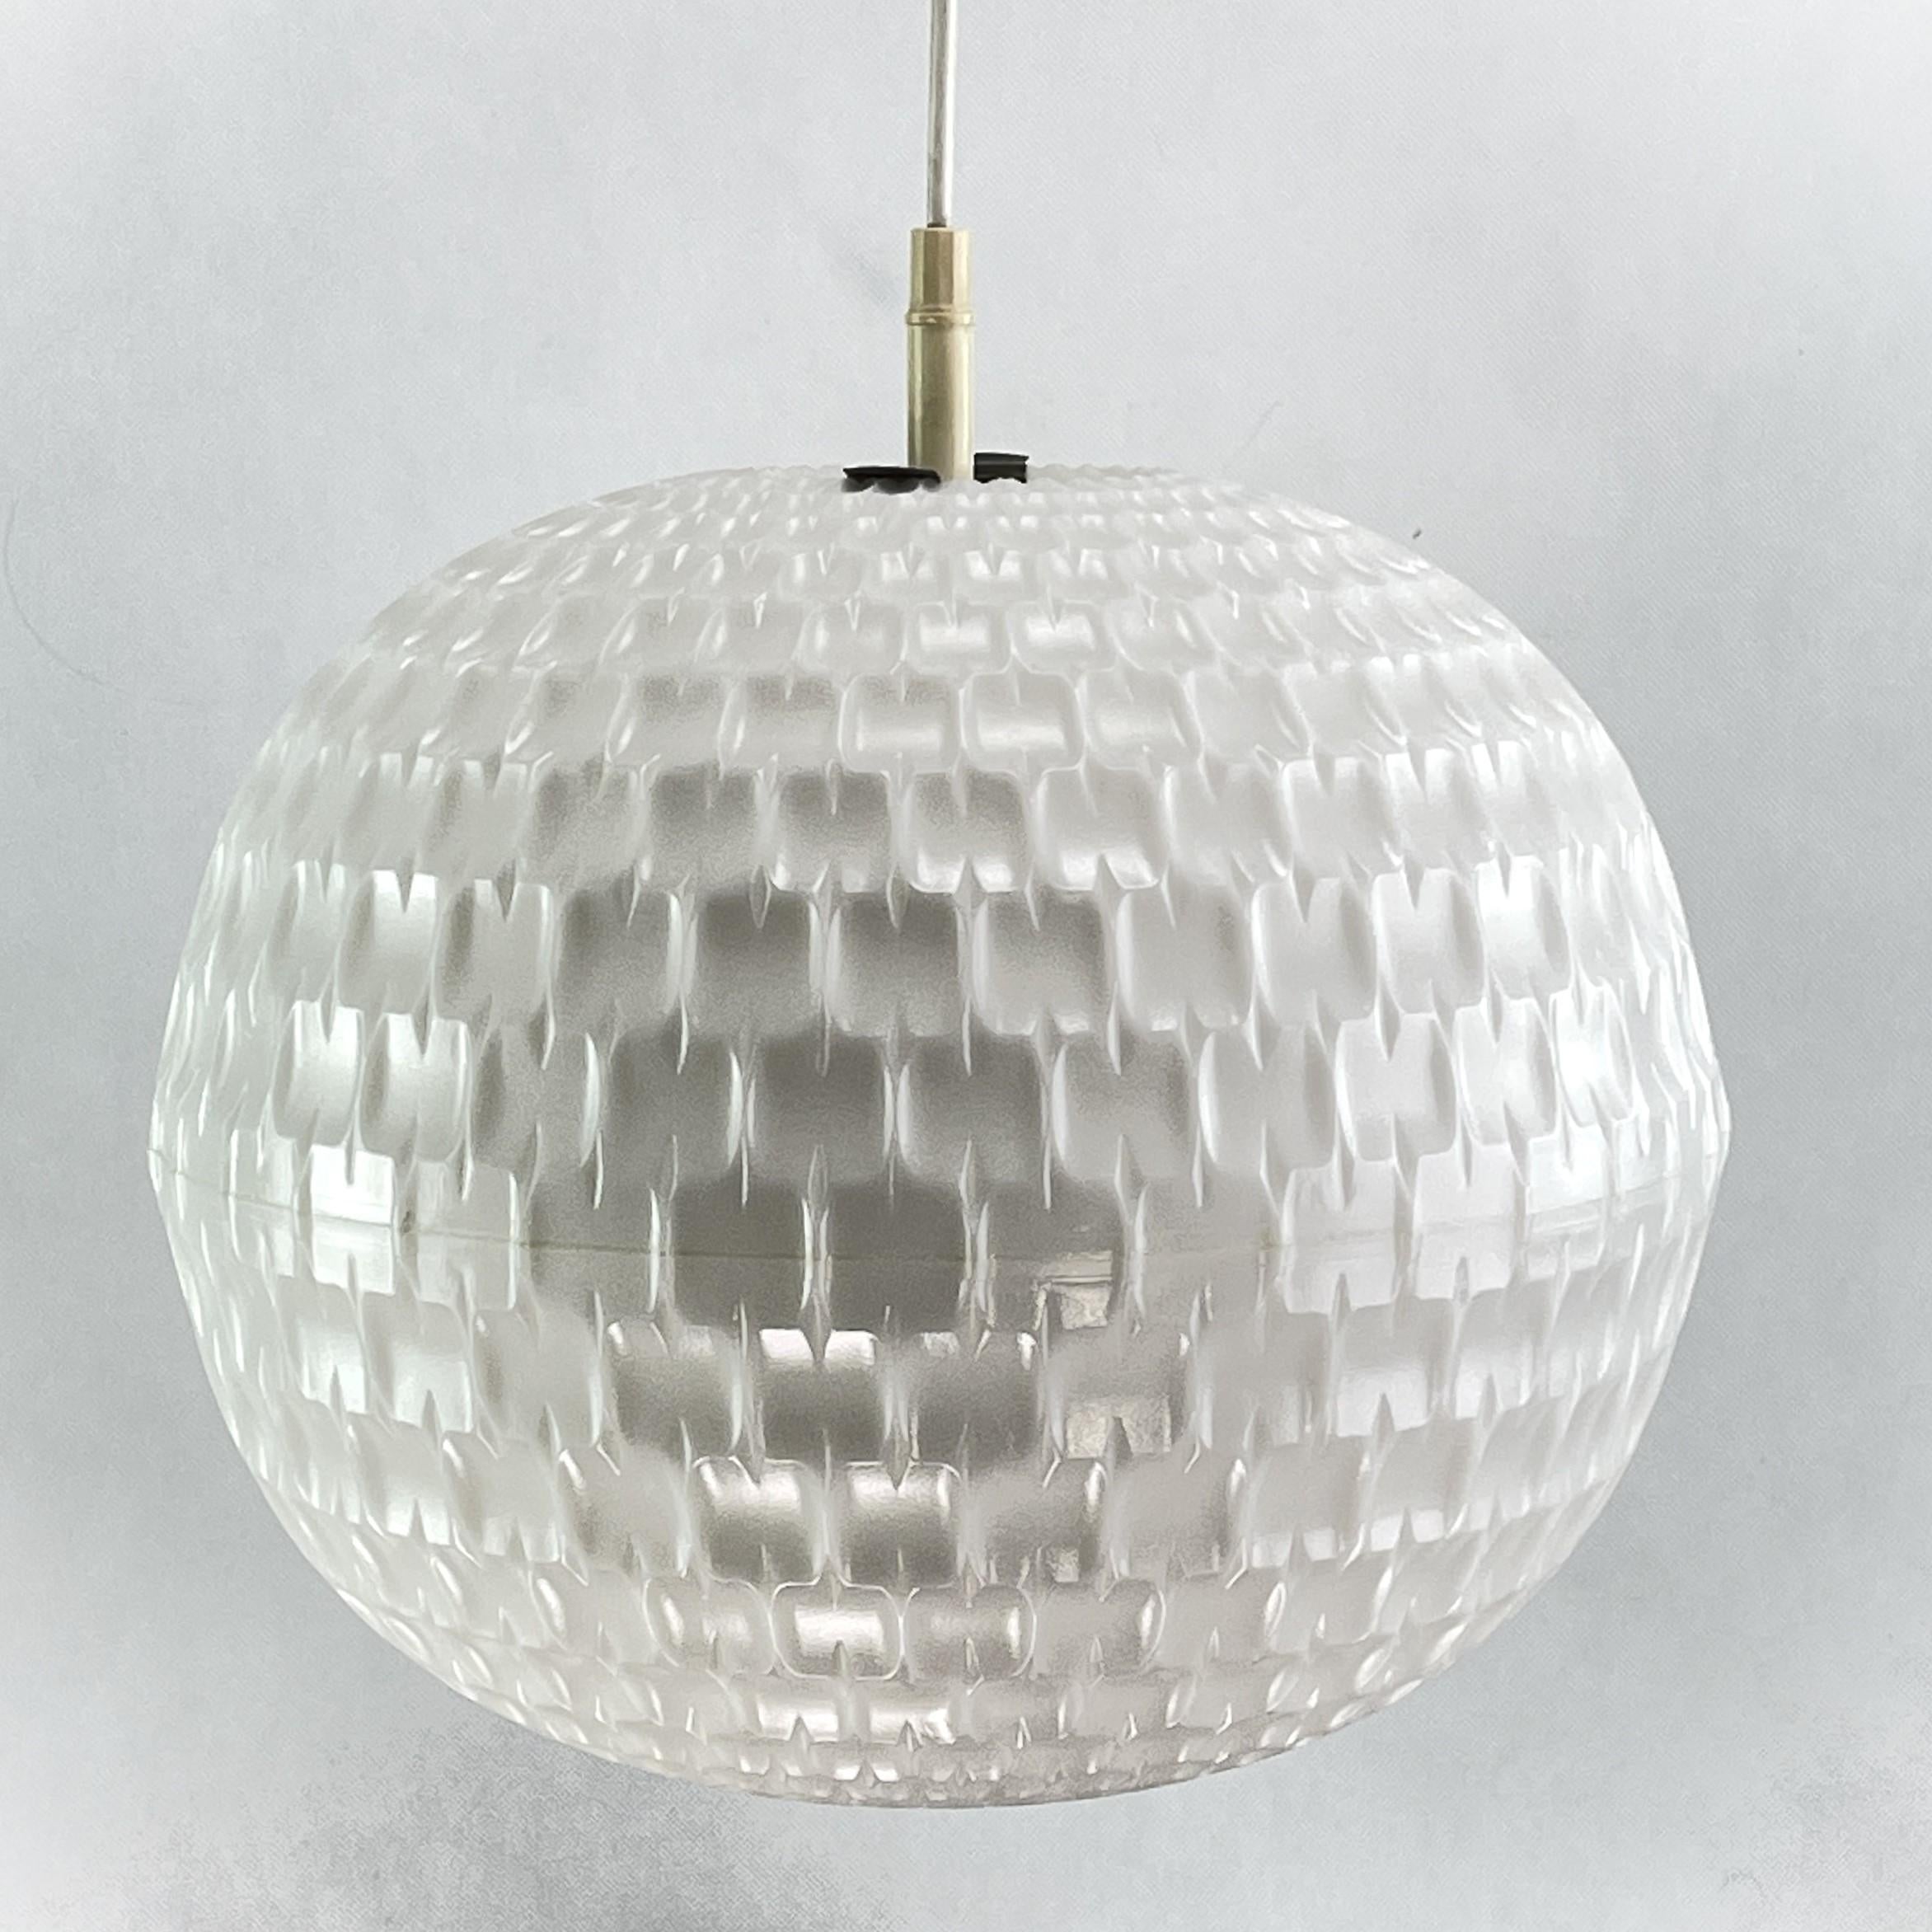 Mid-20th Century Ceiling Lamp from Erco by Gangkofner, 1960s